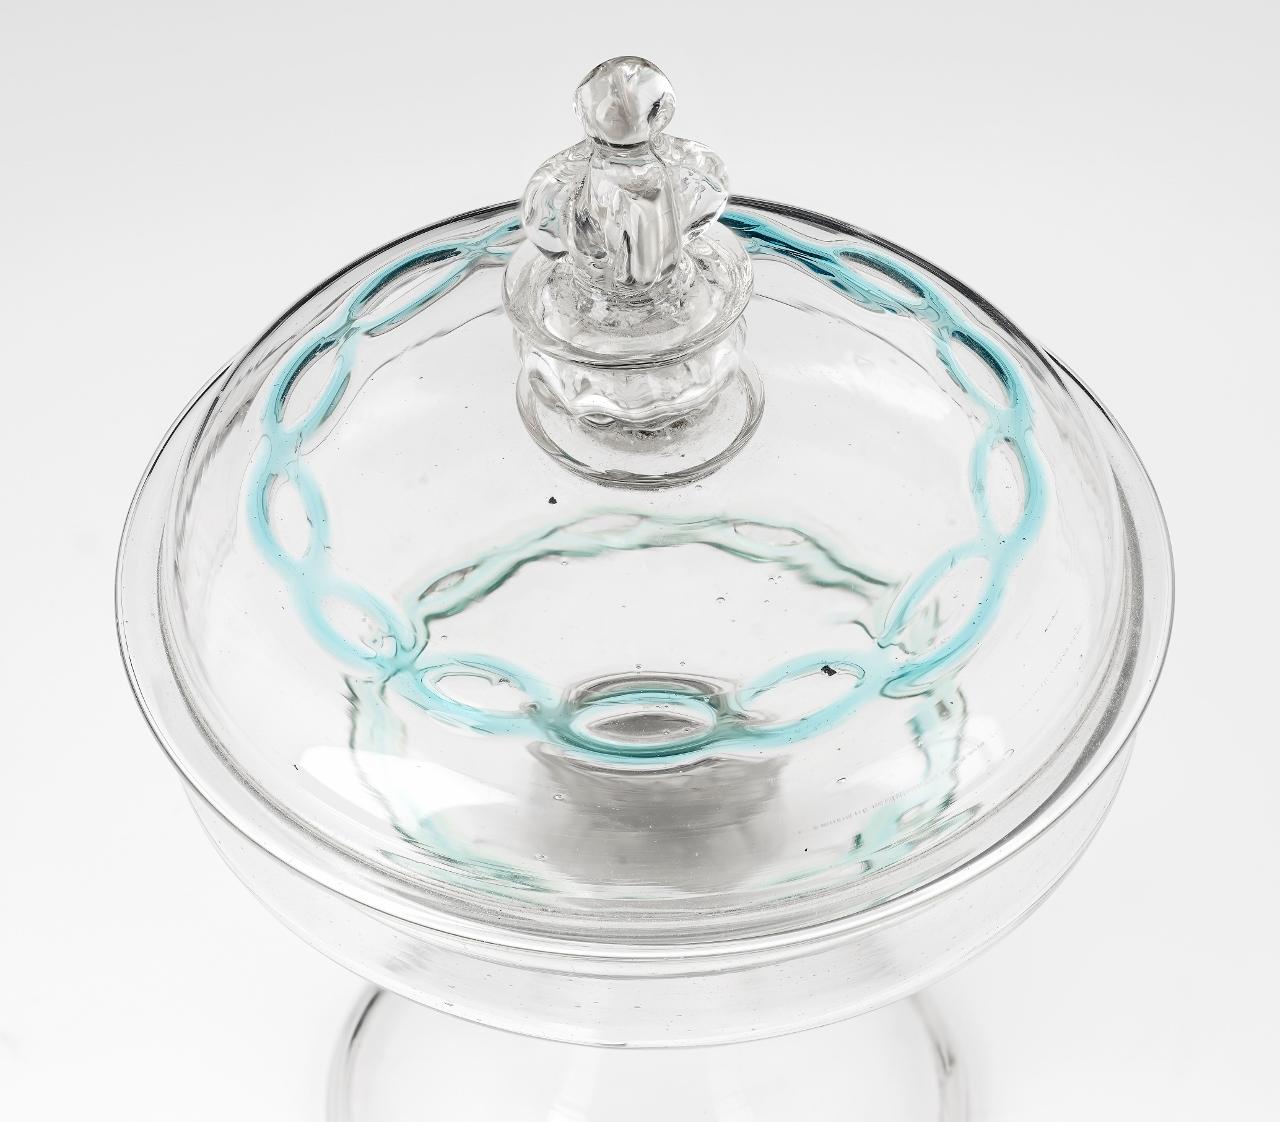 Rare Venetian tazza 17th century with domed cover.

An extremely rare antique Venetian glass footed wine cup or tazza with a domed cover; second half of the 17th century; made with cristallo glass decorated with blue intertwined trailing around